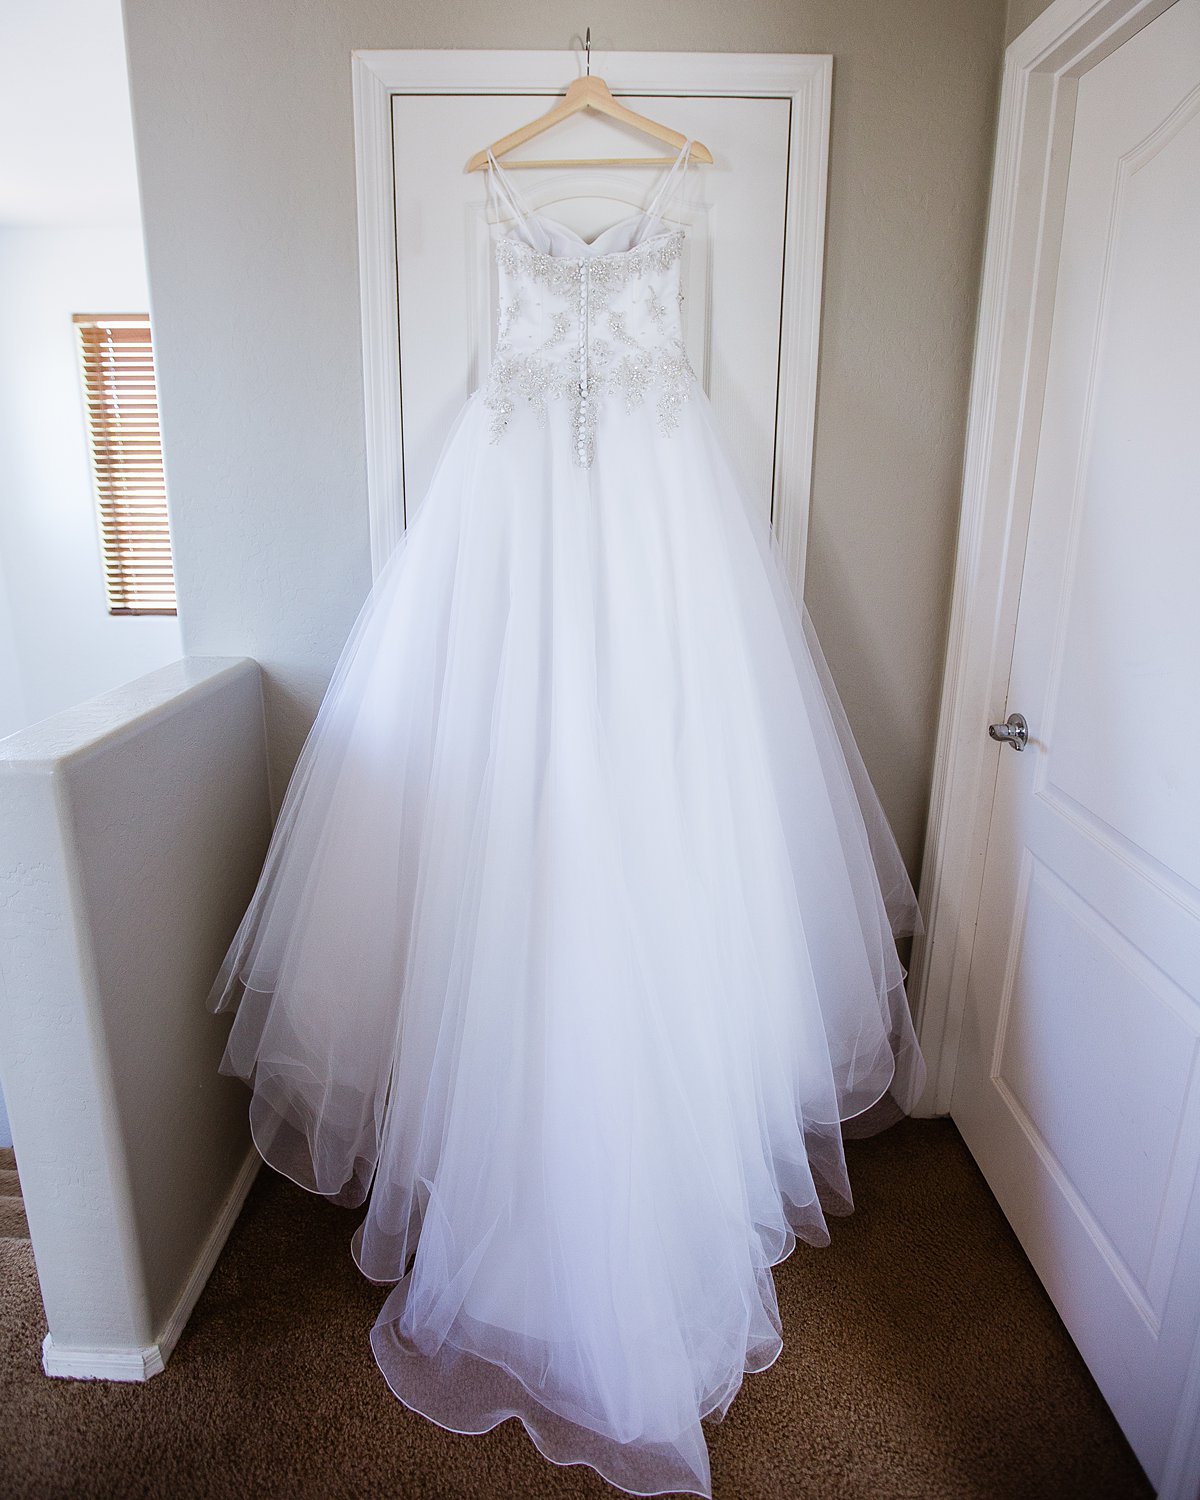 Back of the bride's wedding dress by PMA Photography.